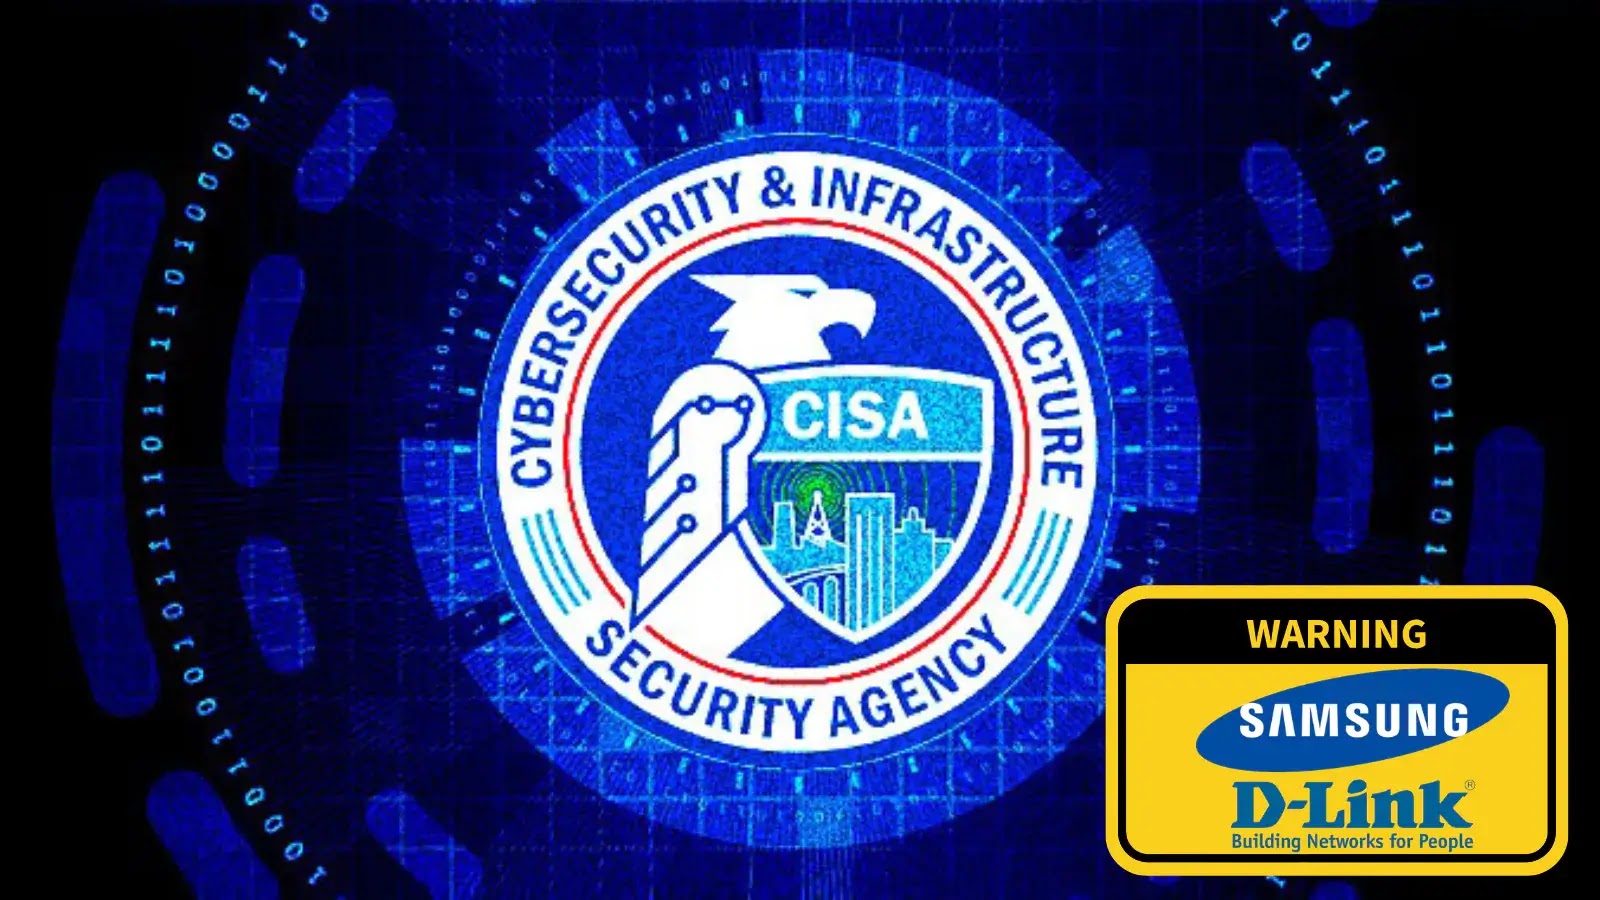 CISA Warns Samsung and D-Link Devices